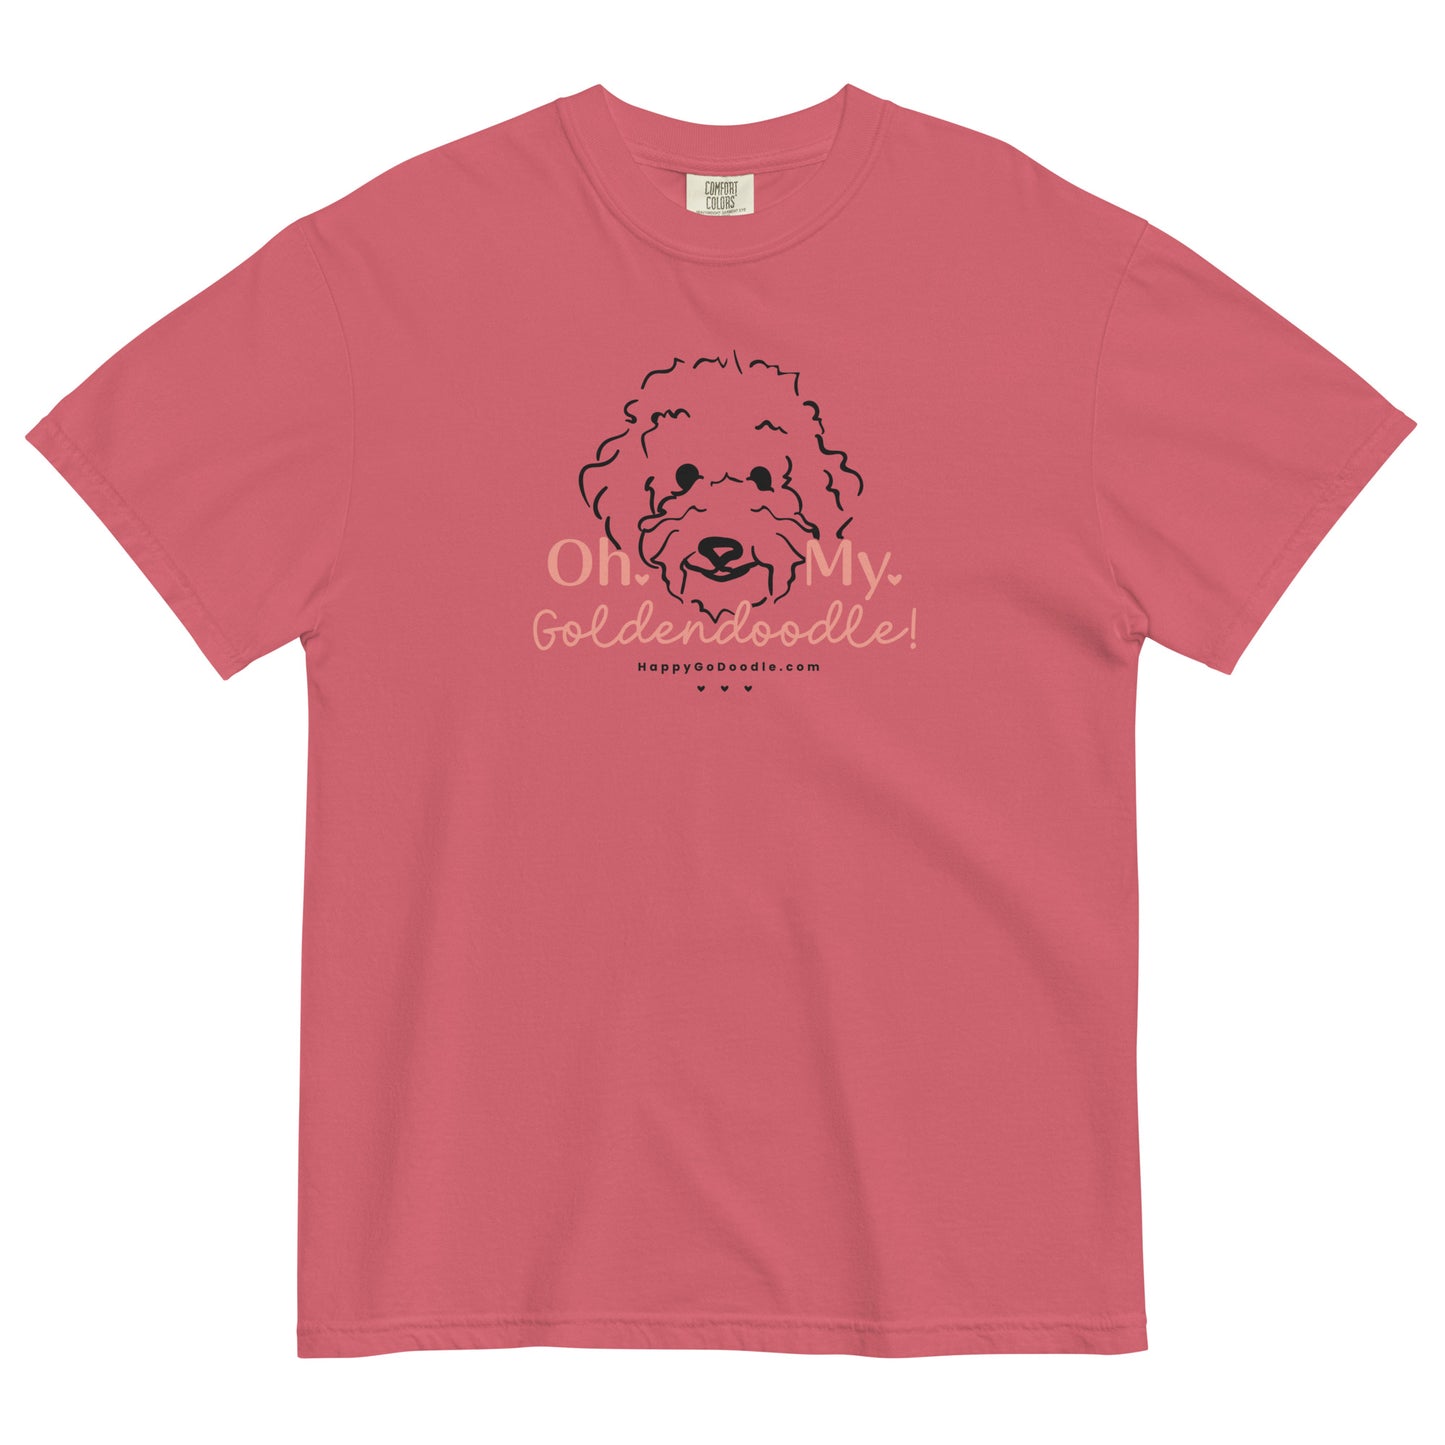 Goldendoodle comfort colors t-shirt with Goldendoodle dog face and words "Oh My Goldendoodle" in watermelon color